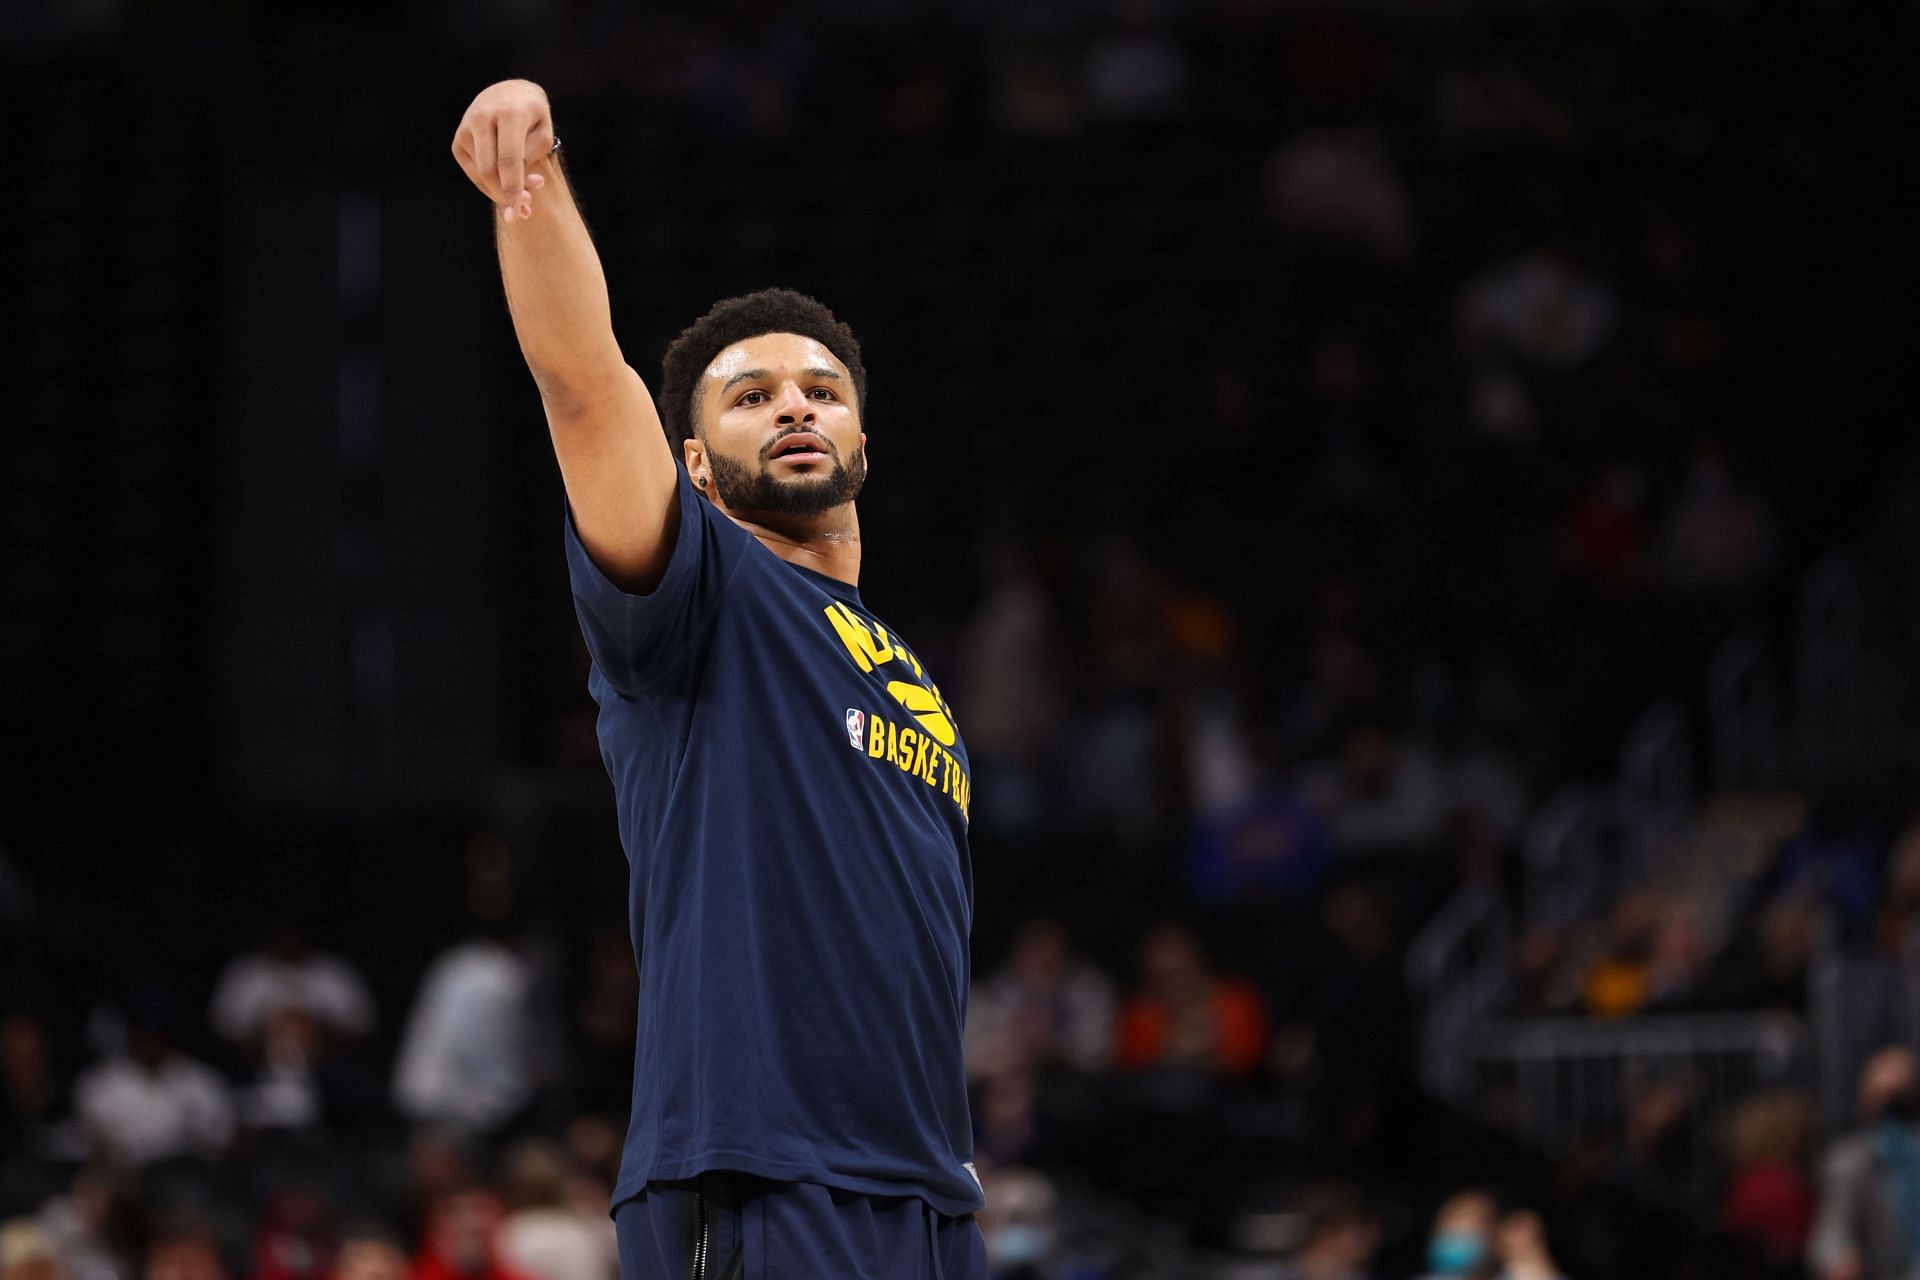 Denver Nuggets star Jamal Murray continues to work his way back to the court